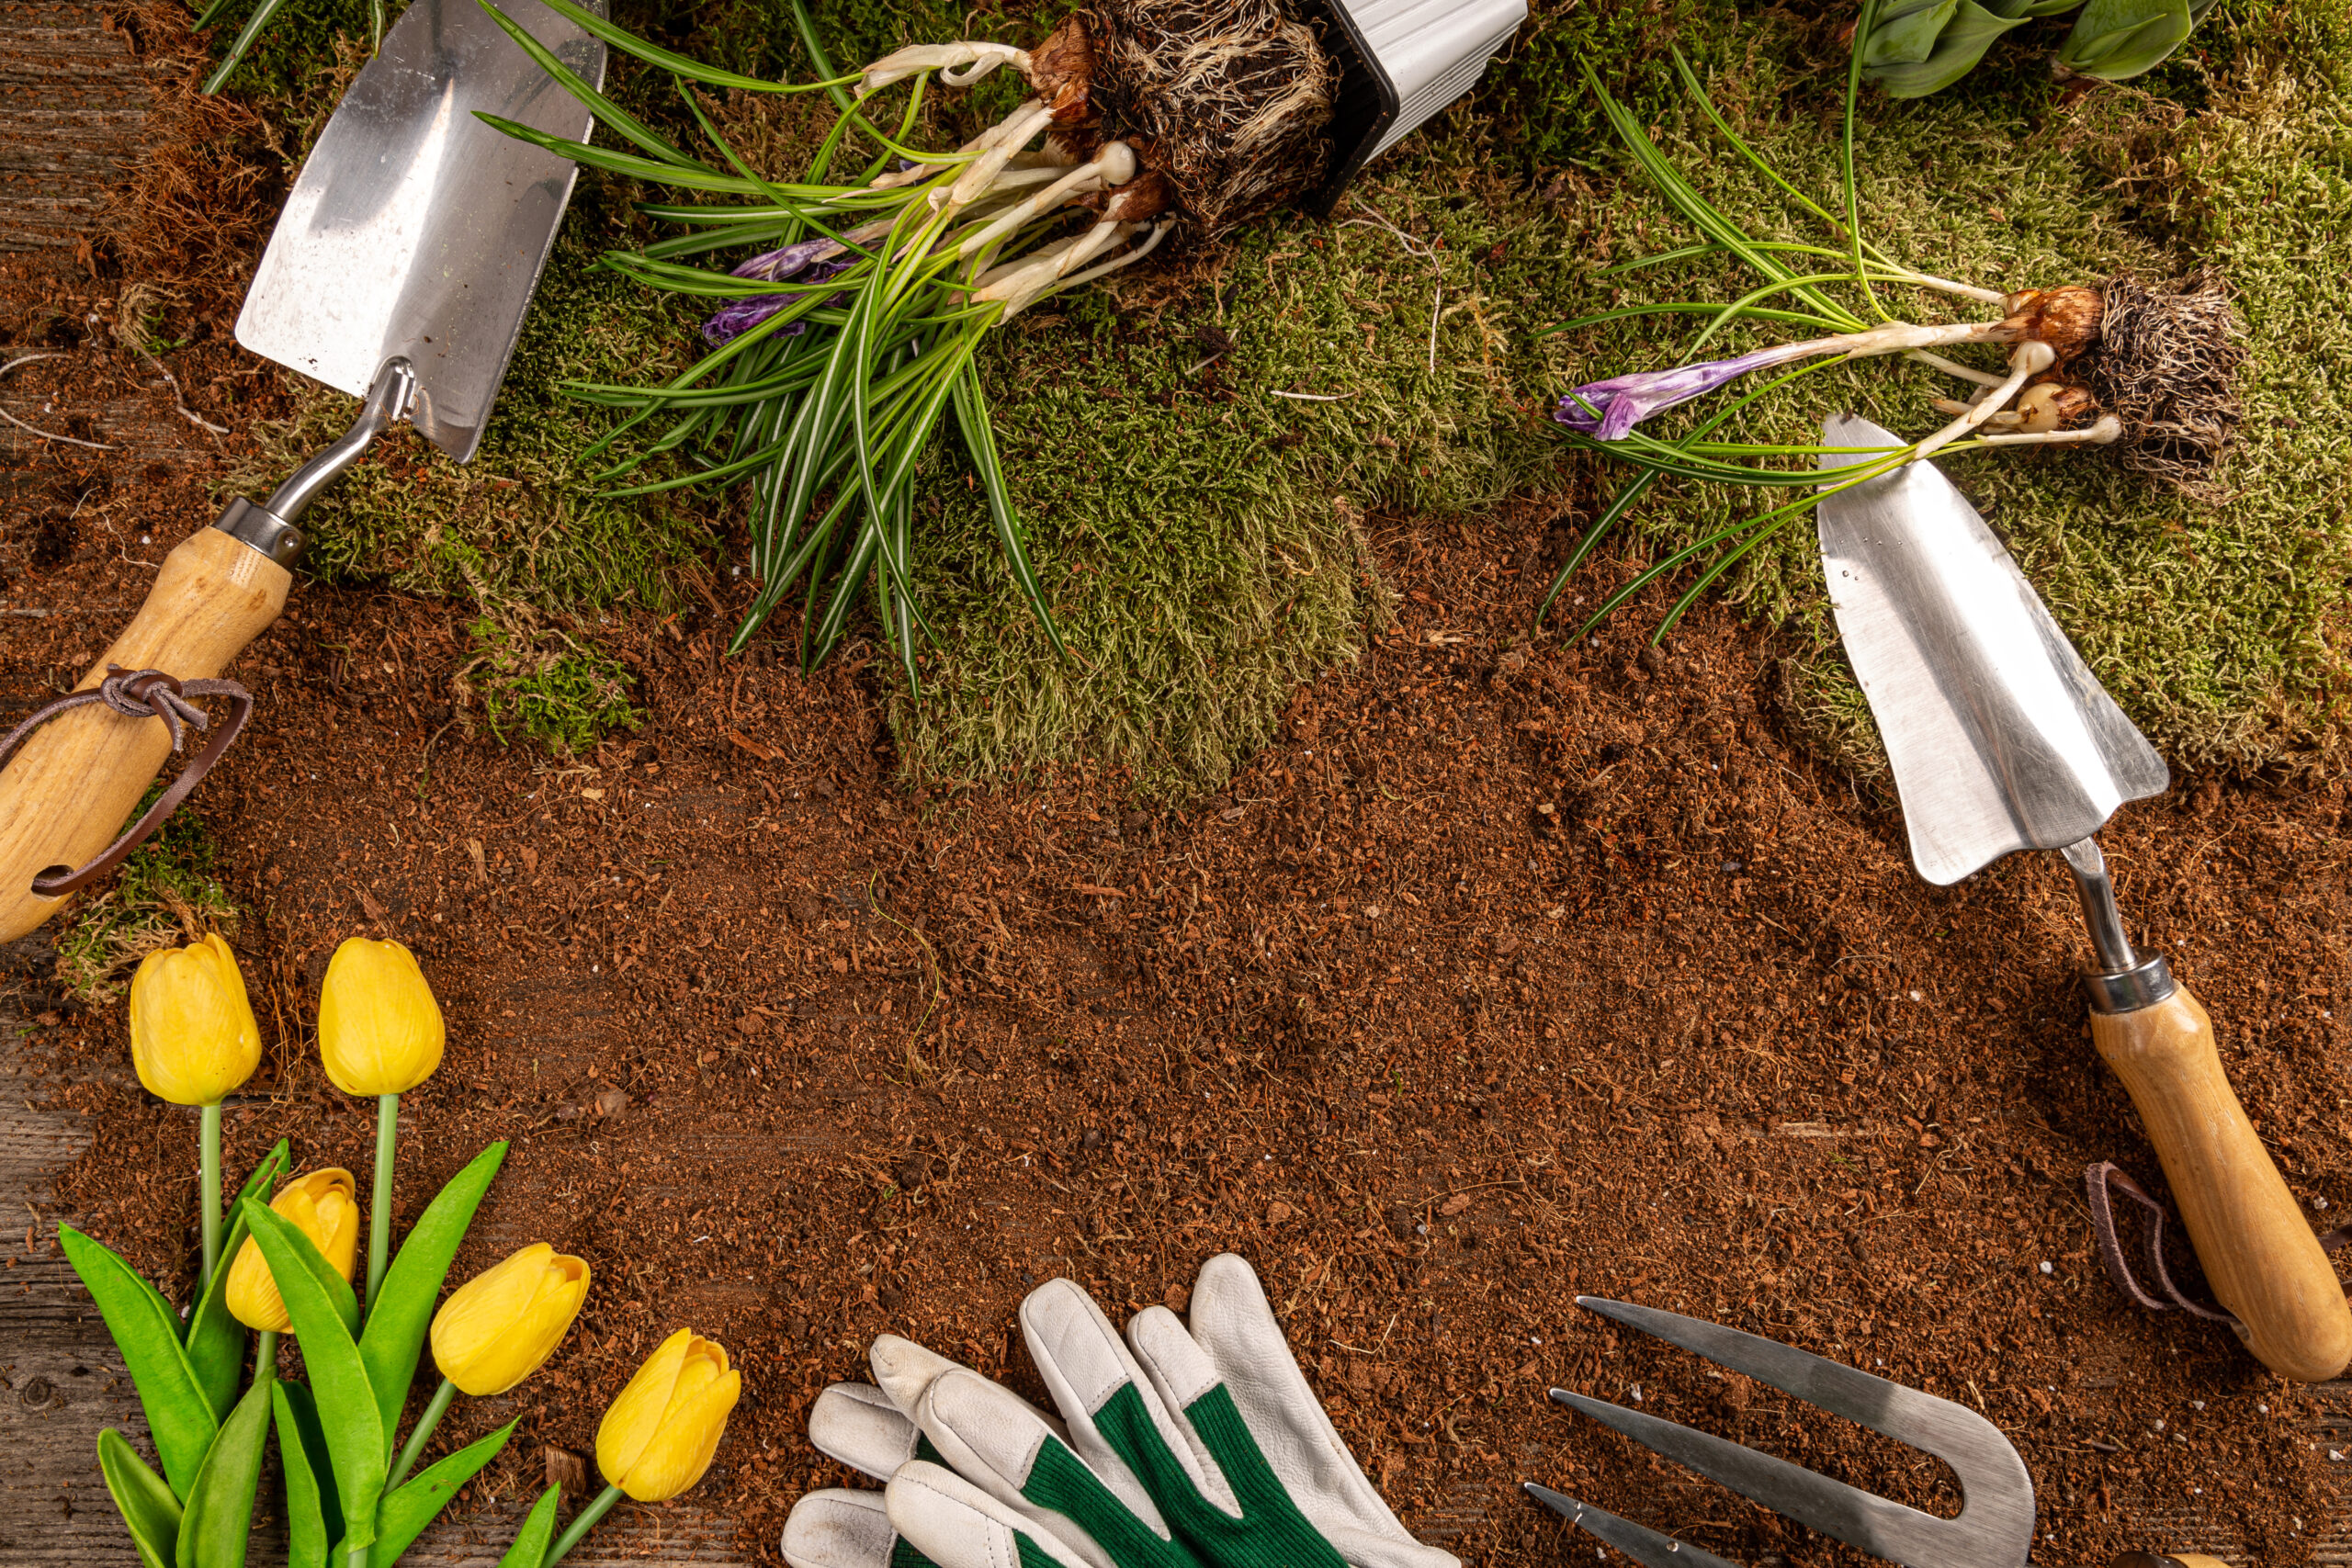 How to choose the right landscaping materials